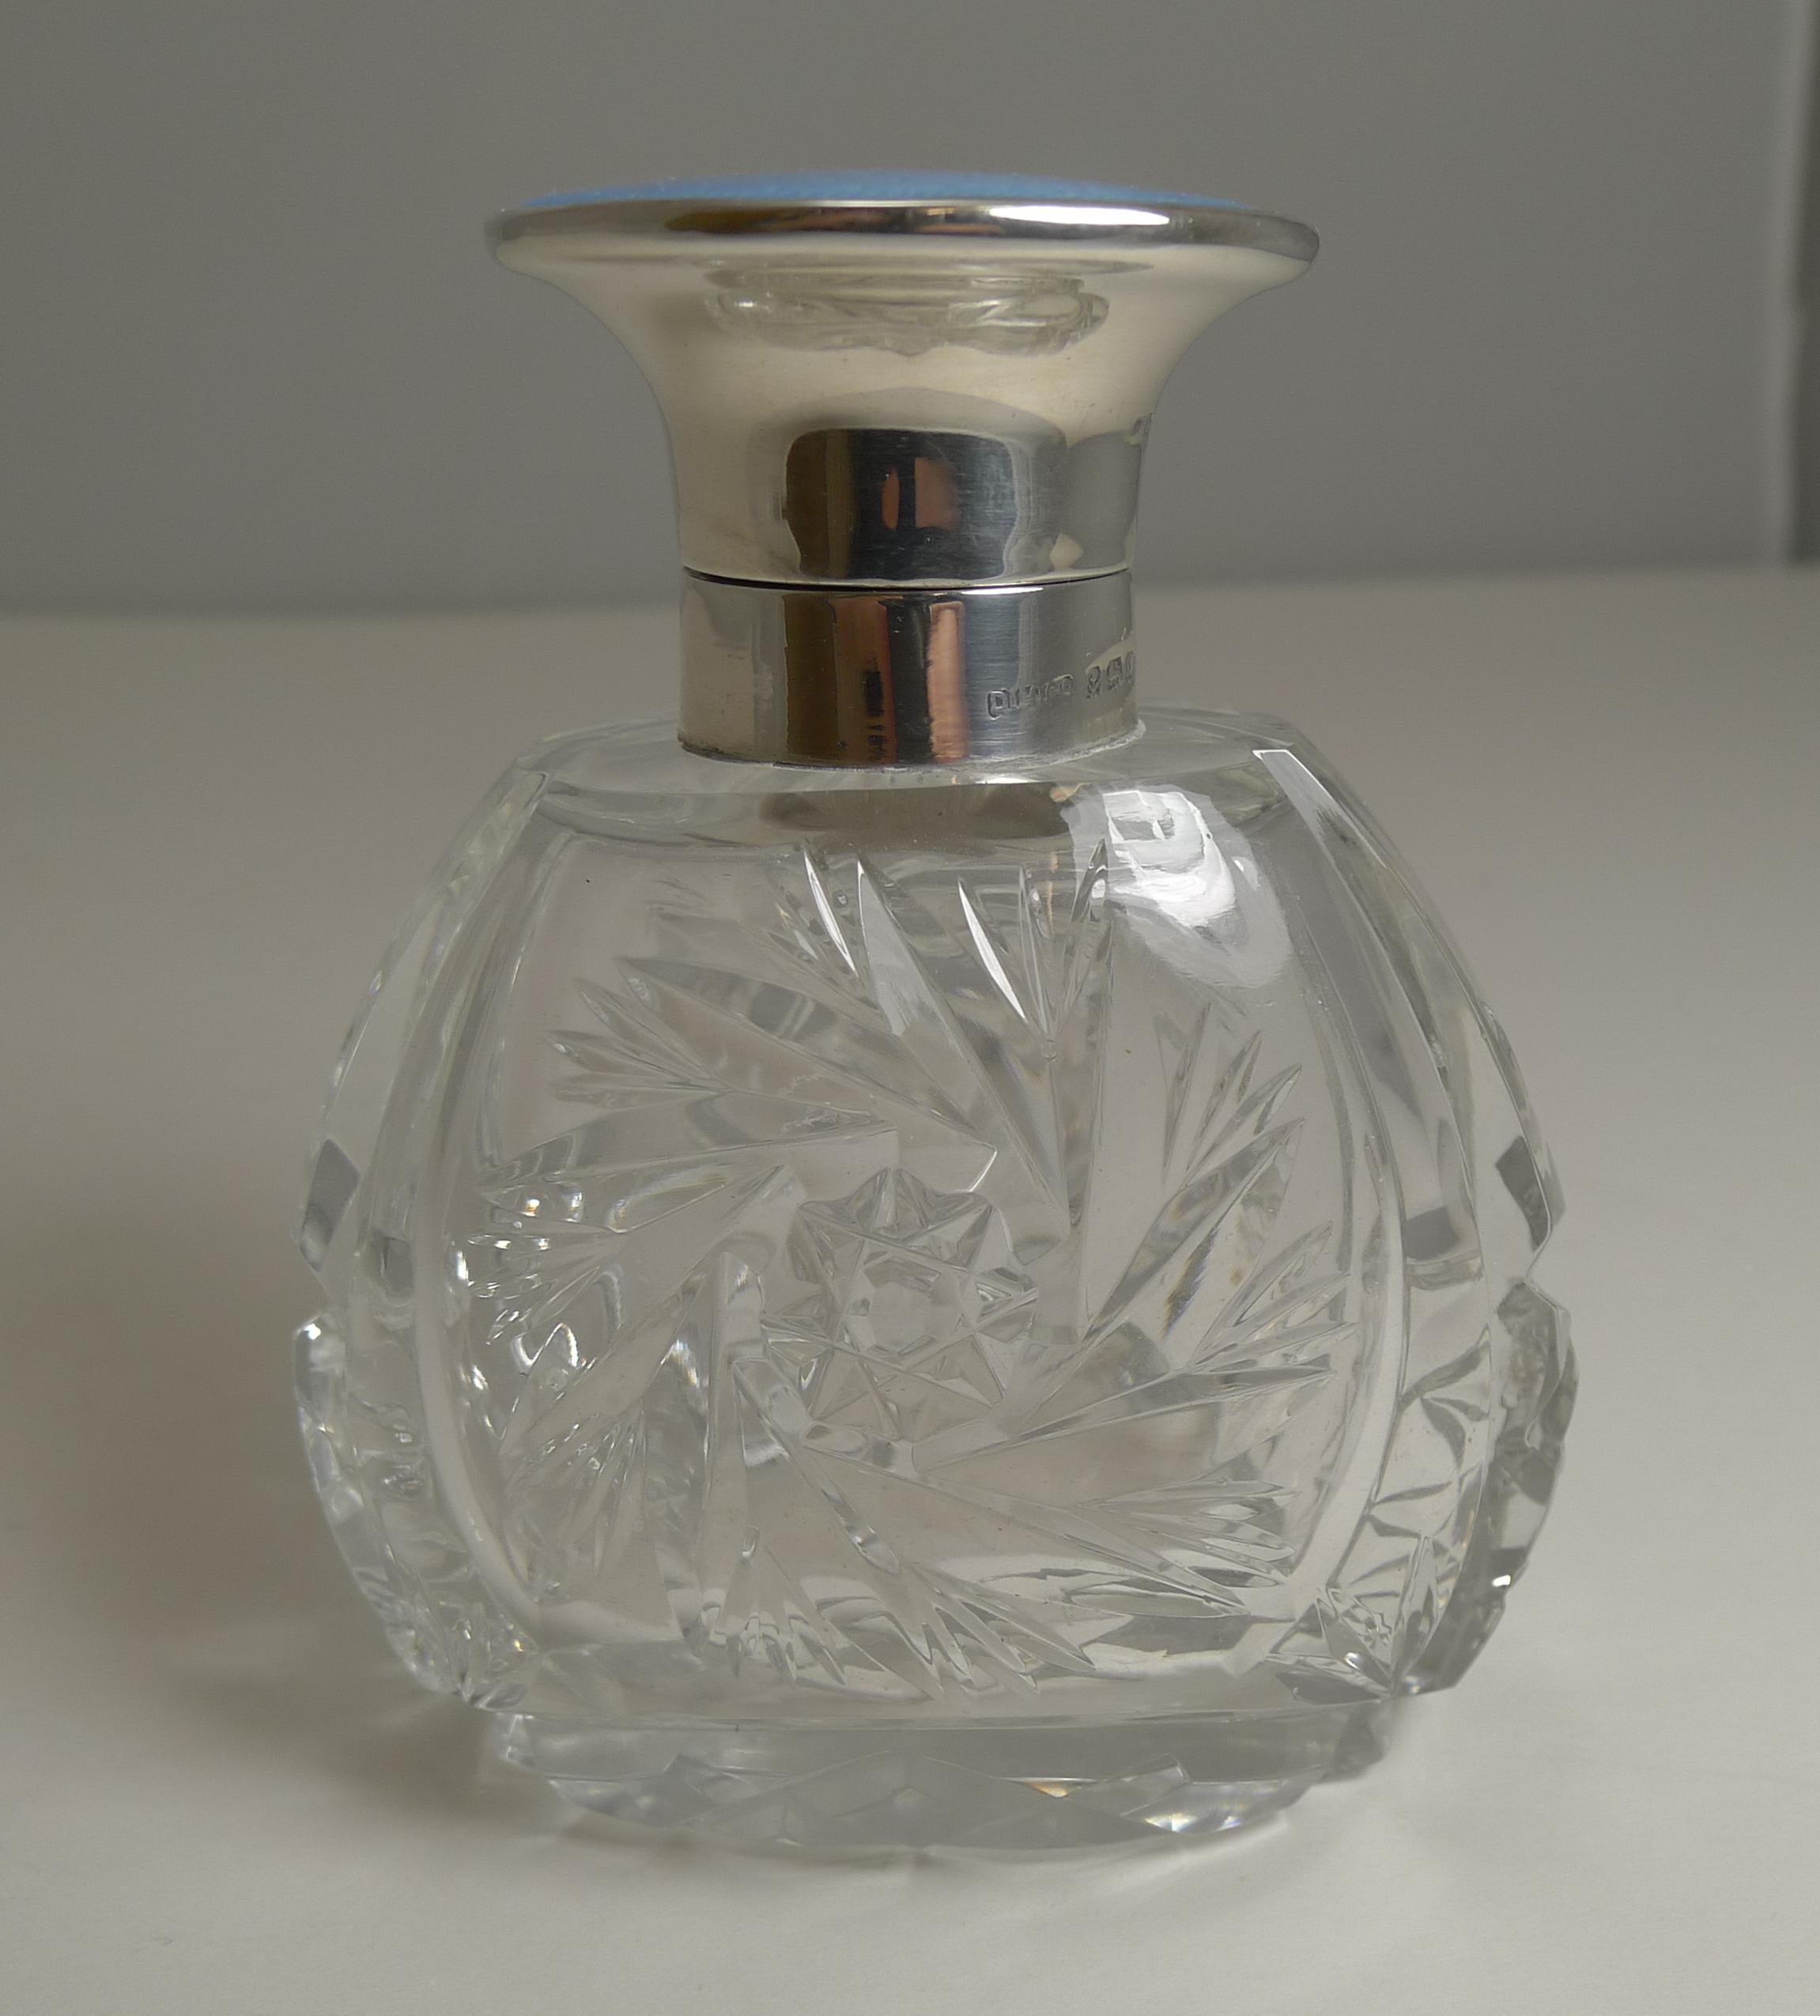 A beautiful perfume or scent bottle made from a heavy piece of English crystal intricately handcut in a variety of designs.

The collar and hinged lid is made from English sterling silver fully hallmarked for Birmingham 1934 together with the